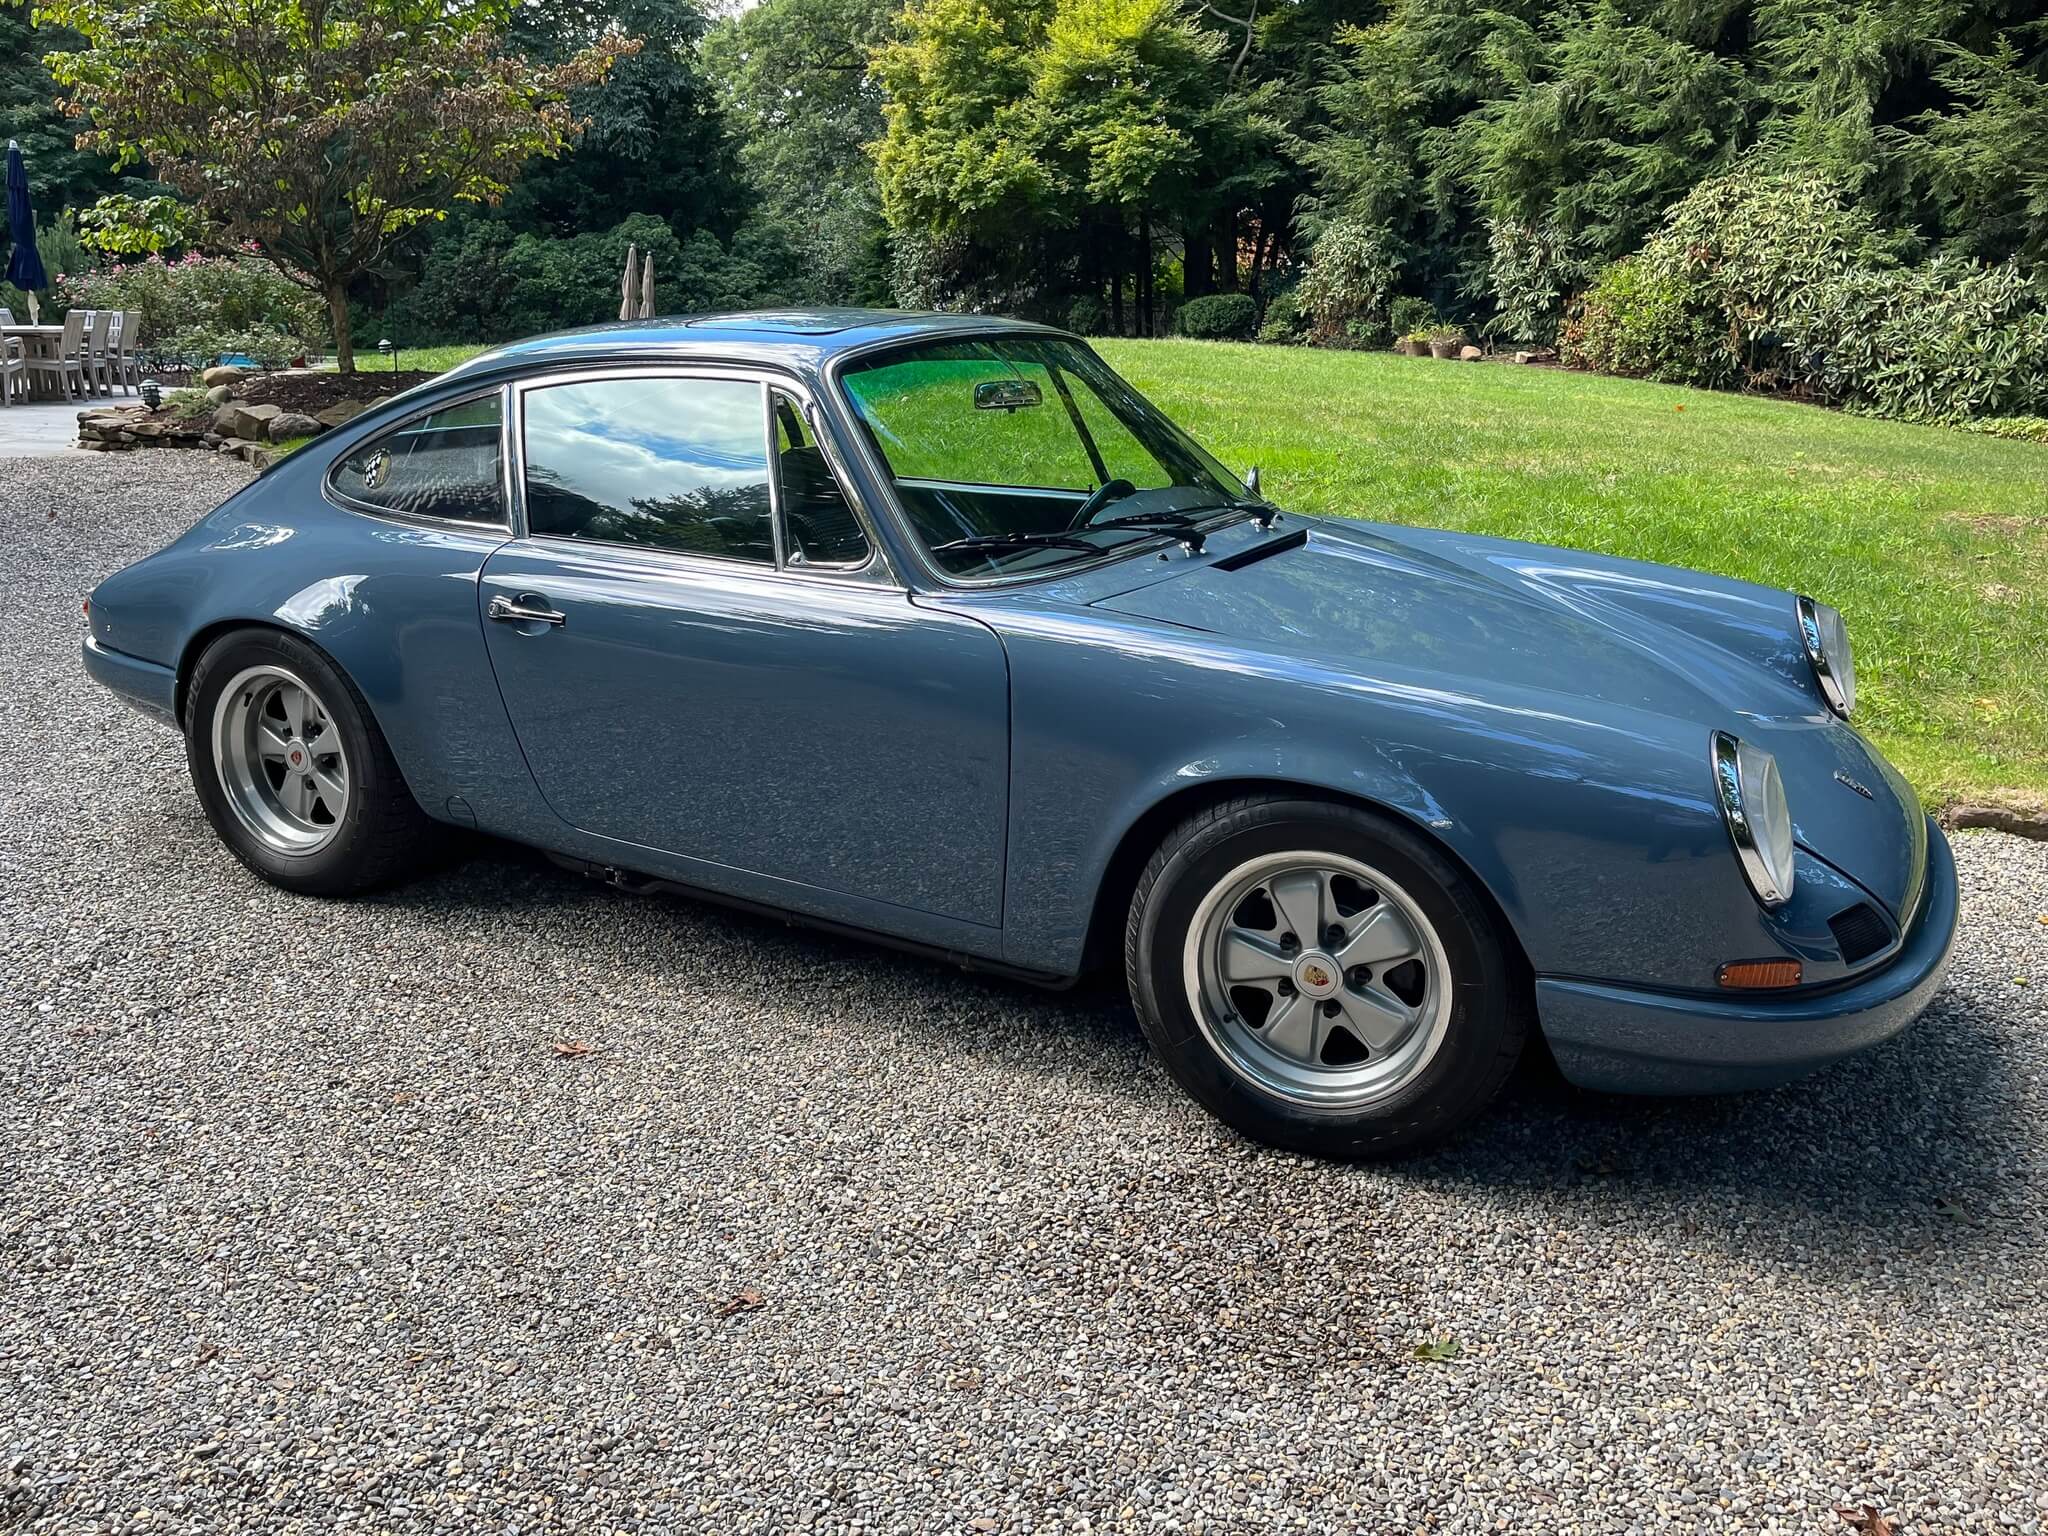 Restored 1980 Porsche 911SC Coupe By ROCS Motorsports Up For Sale